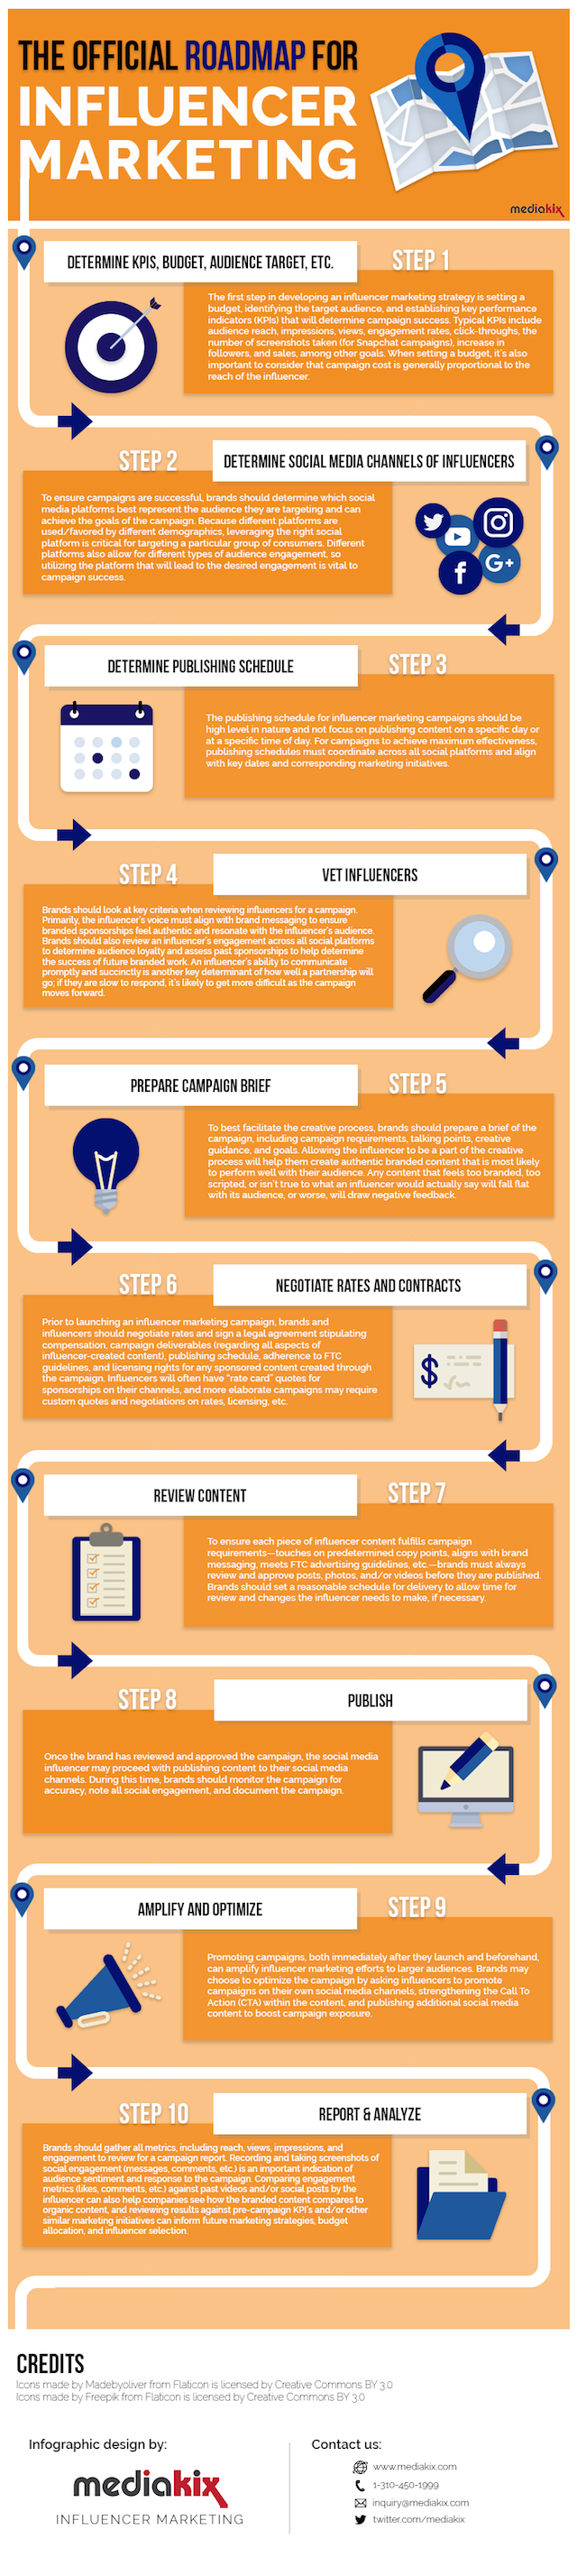 Influencer-Marketing-Infographic-Roadmap-Steps-Guide3-1